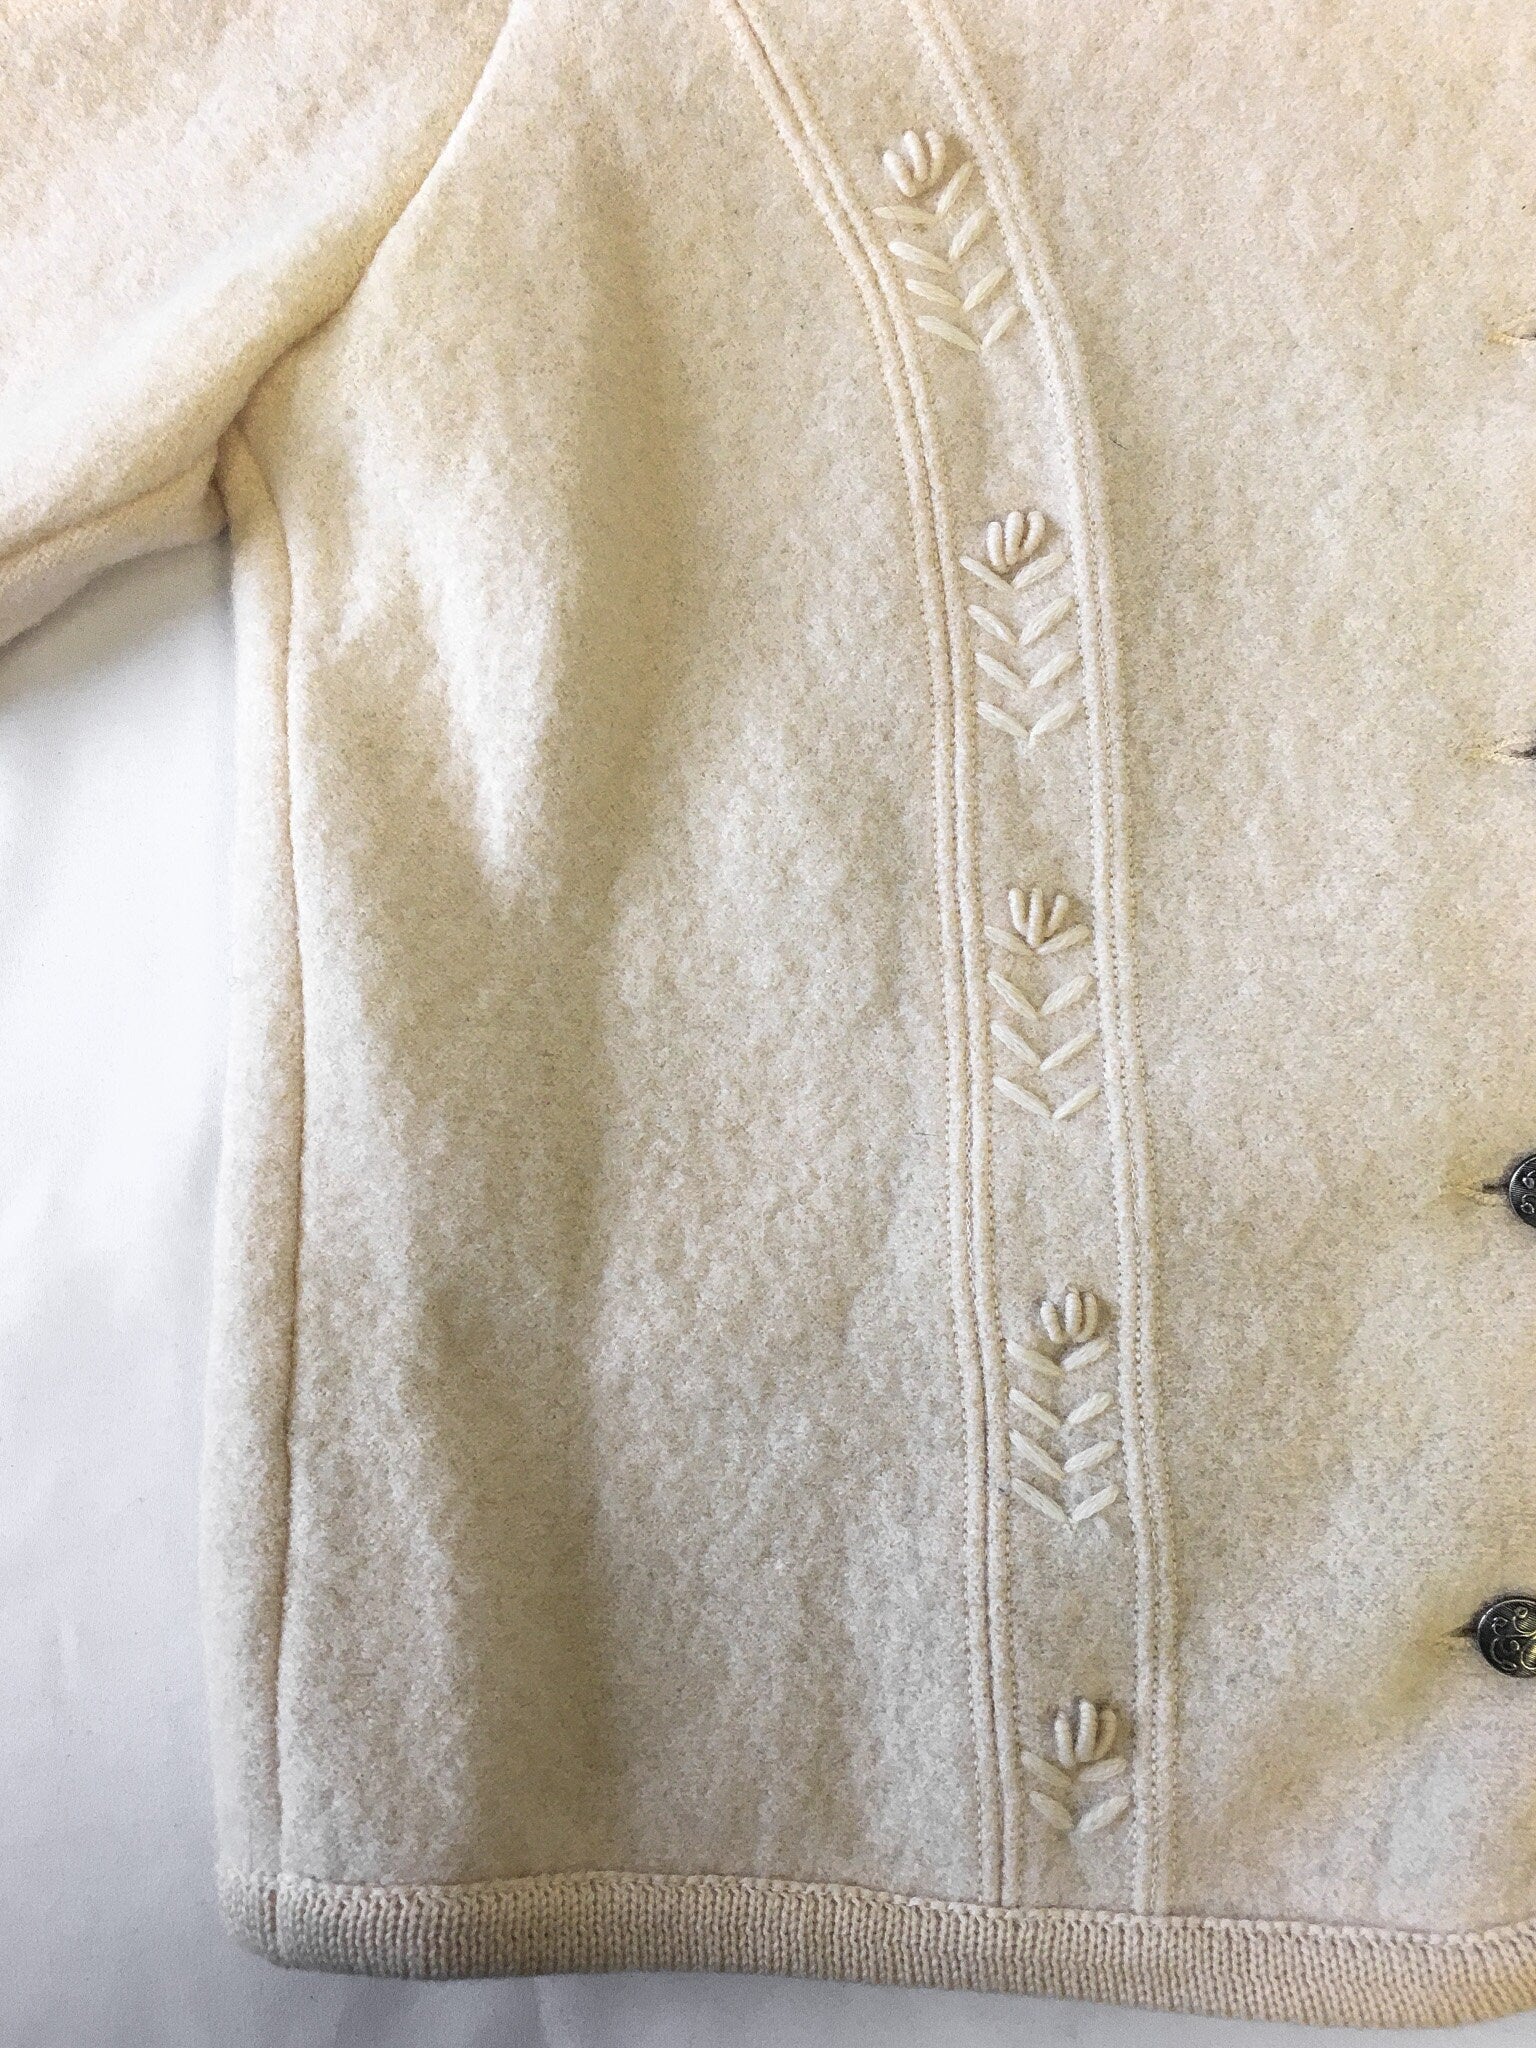 Vintage Geiger Cream Pure Wool Button Up Cardigan with Floral Detail, Sz. 38, Made in Austria